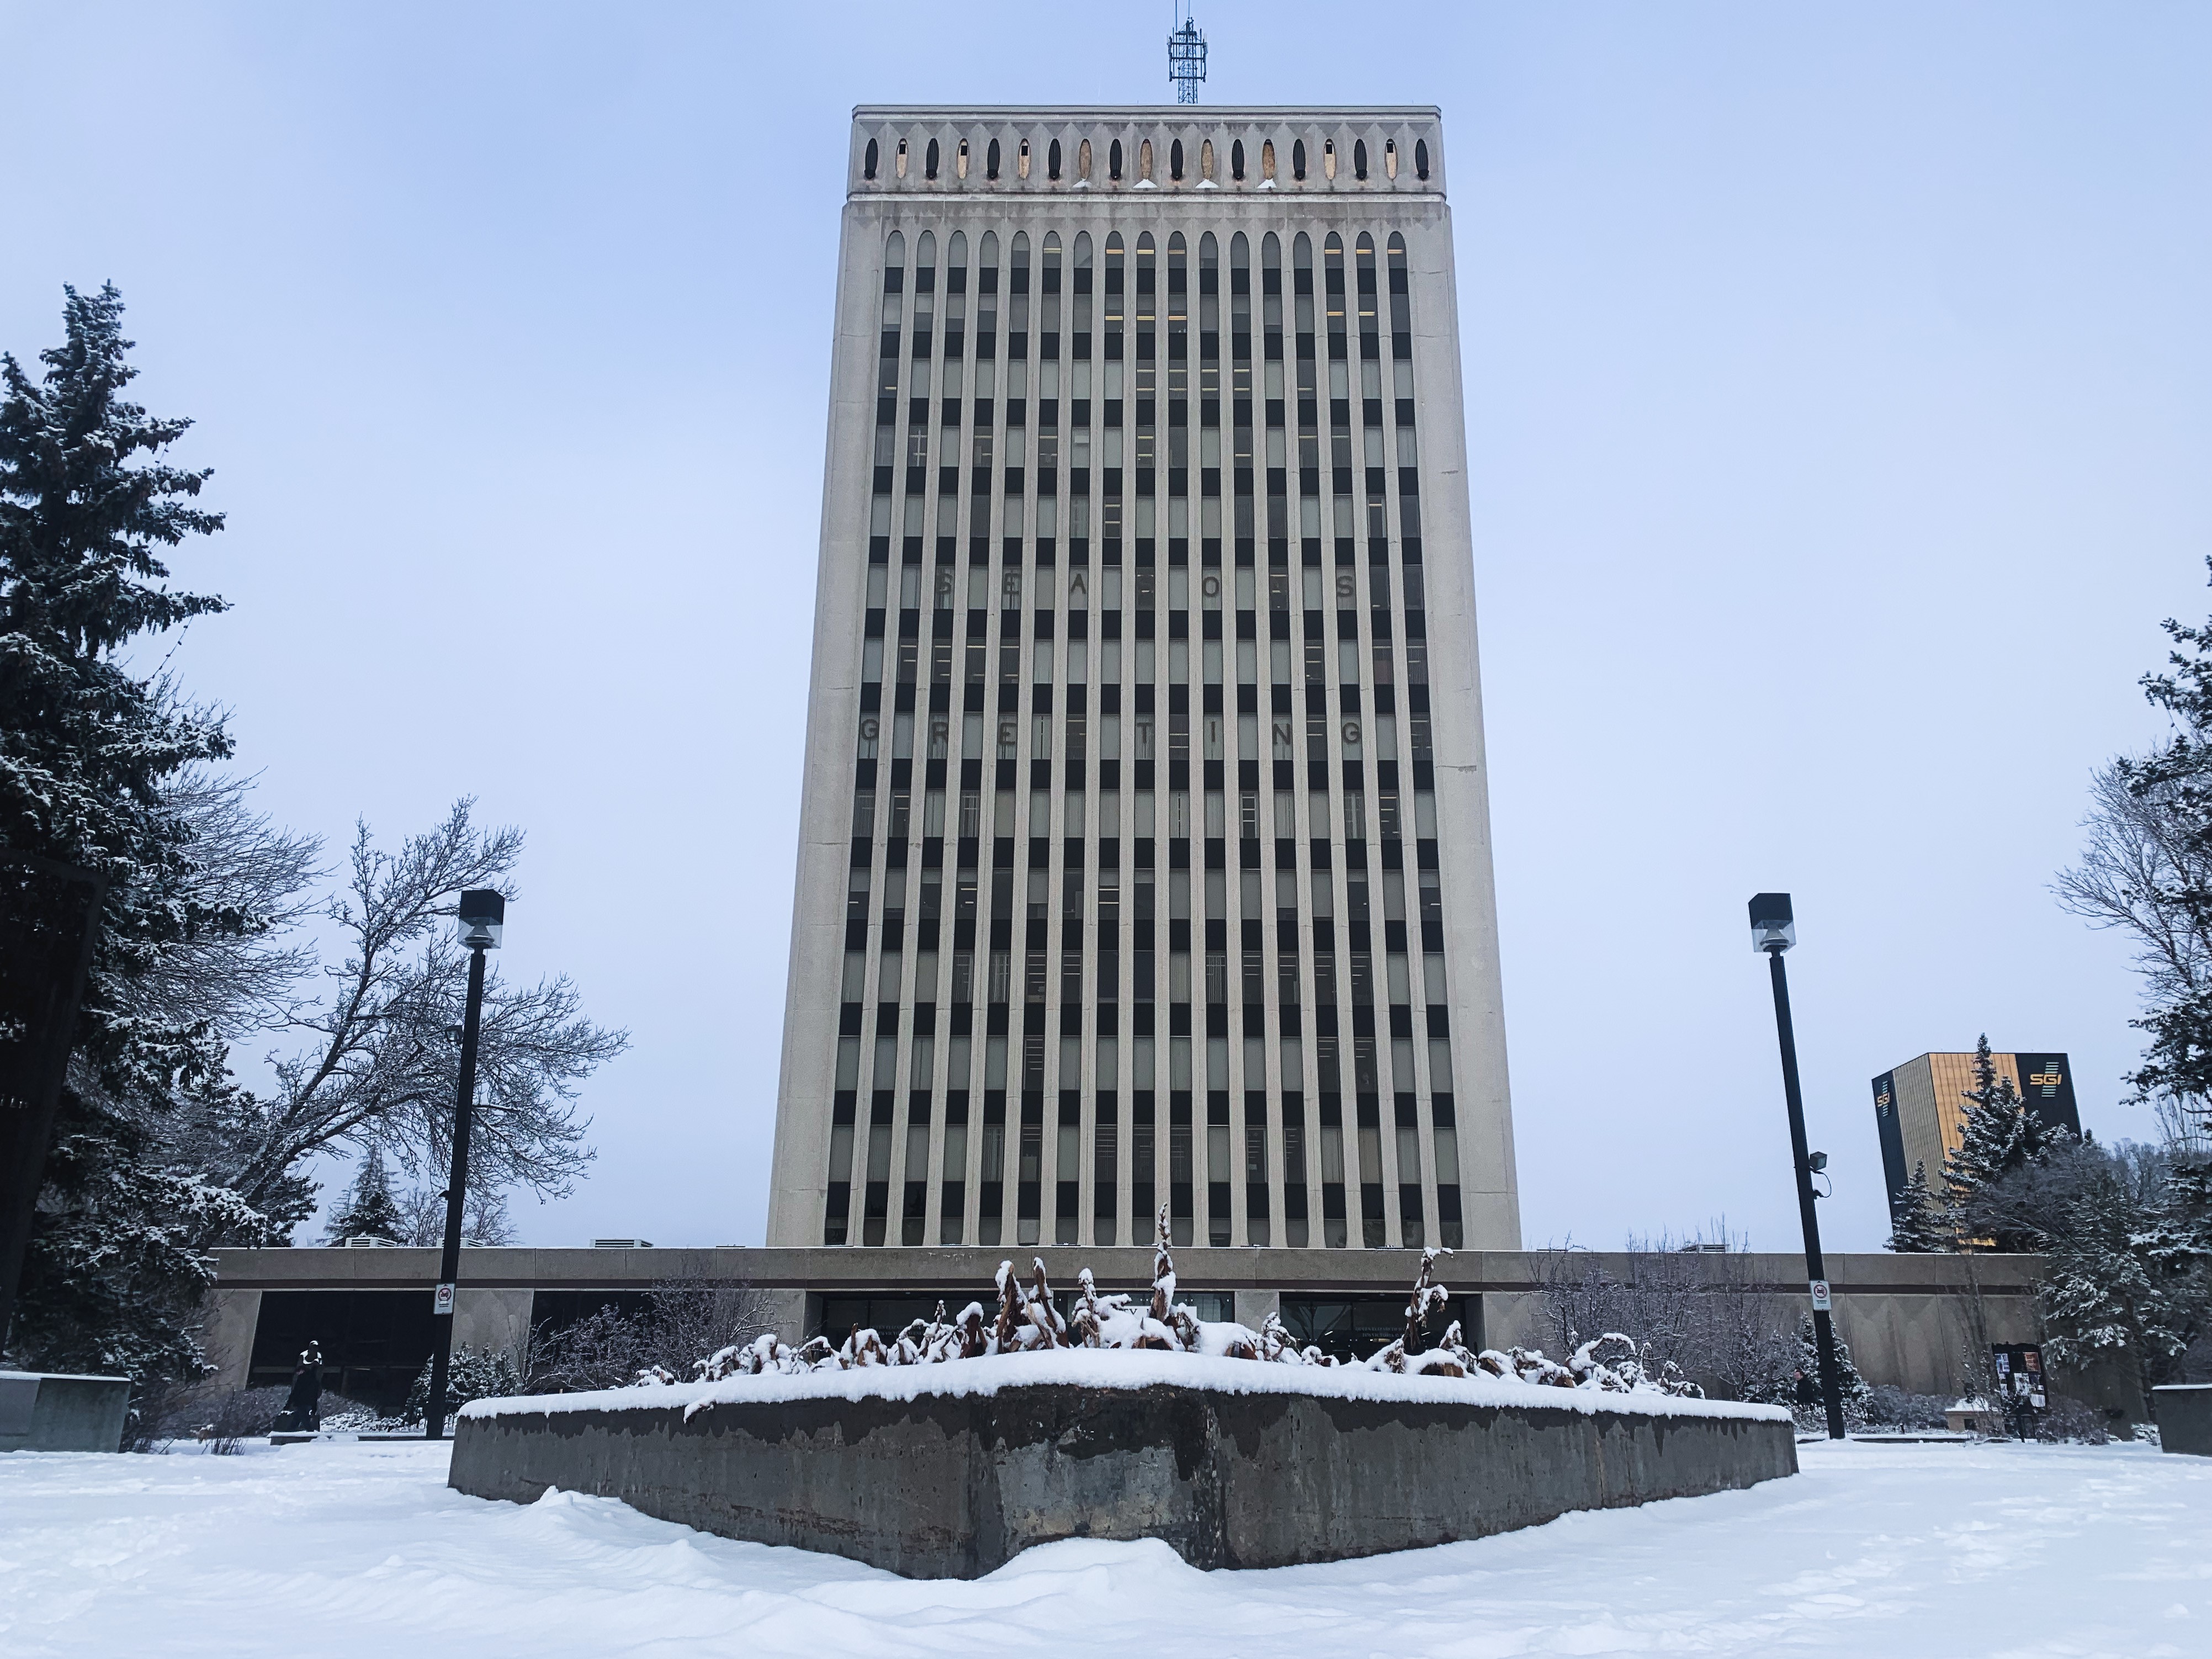 Regina city council to release details of city budget, including debt limit increase